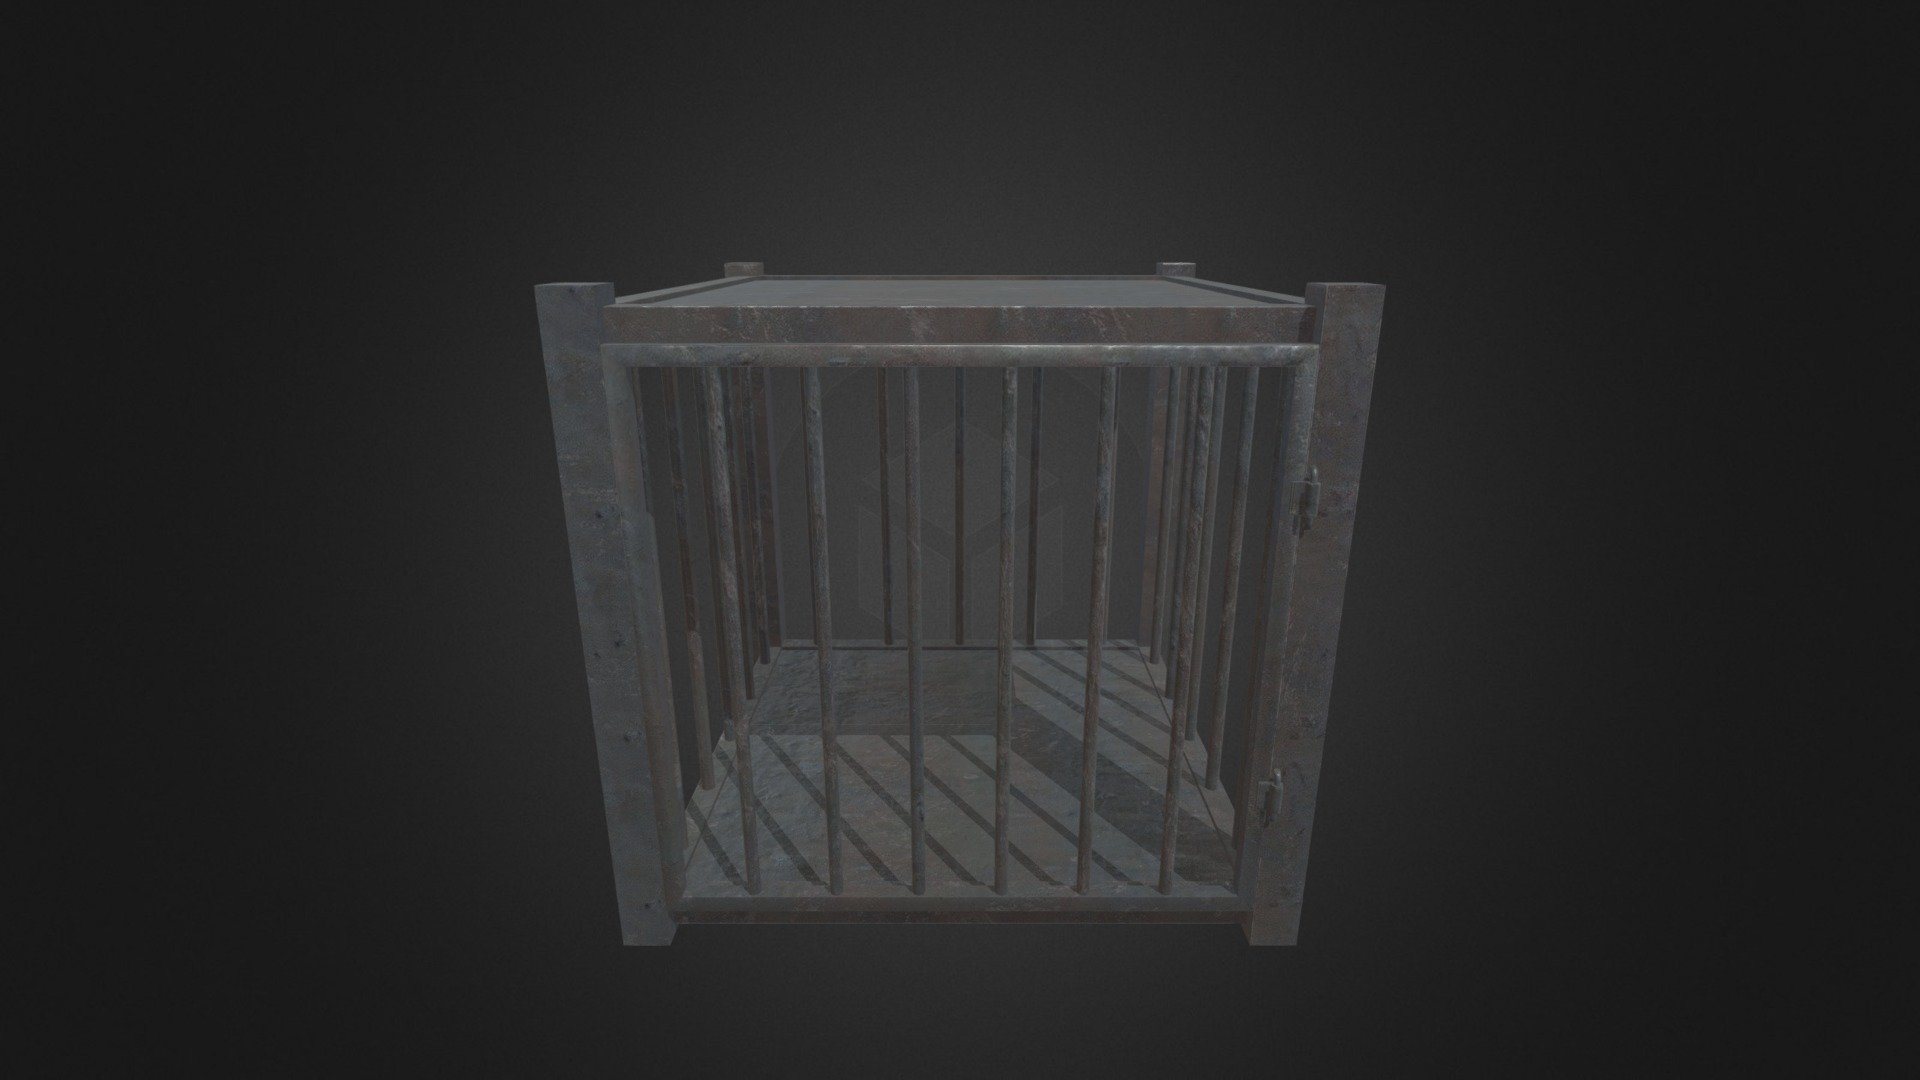 High-Quality low-poly 3D Prison cage model. Ready to use in medieval, fantasy style projects. AR/VR compatible. PBR textures. Standard materials with topology clean mesh 3d model